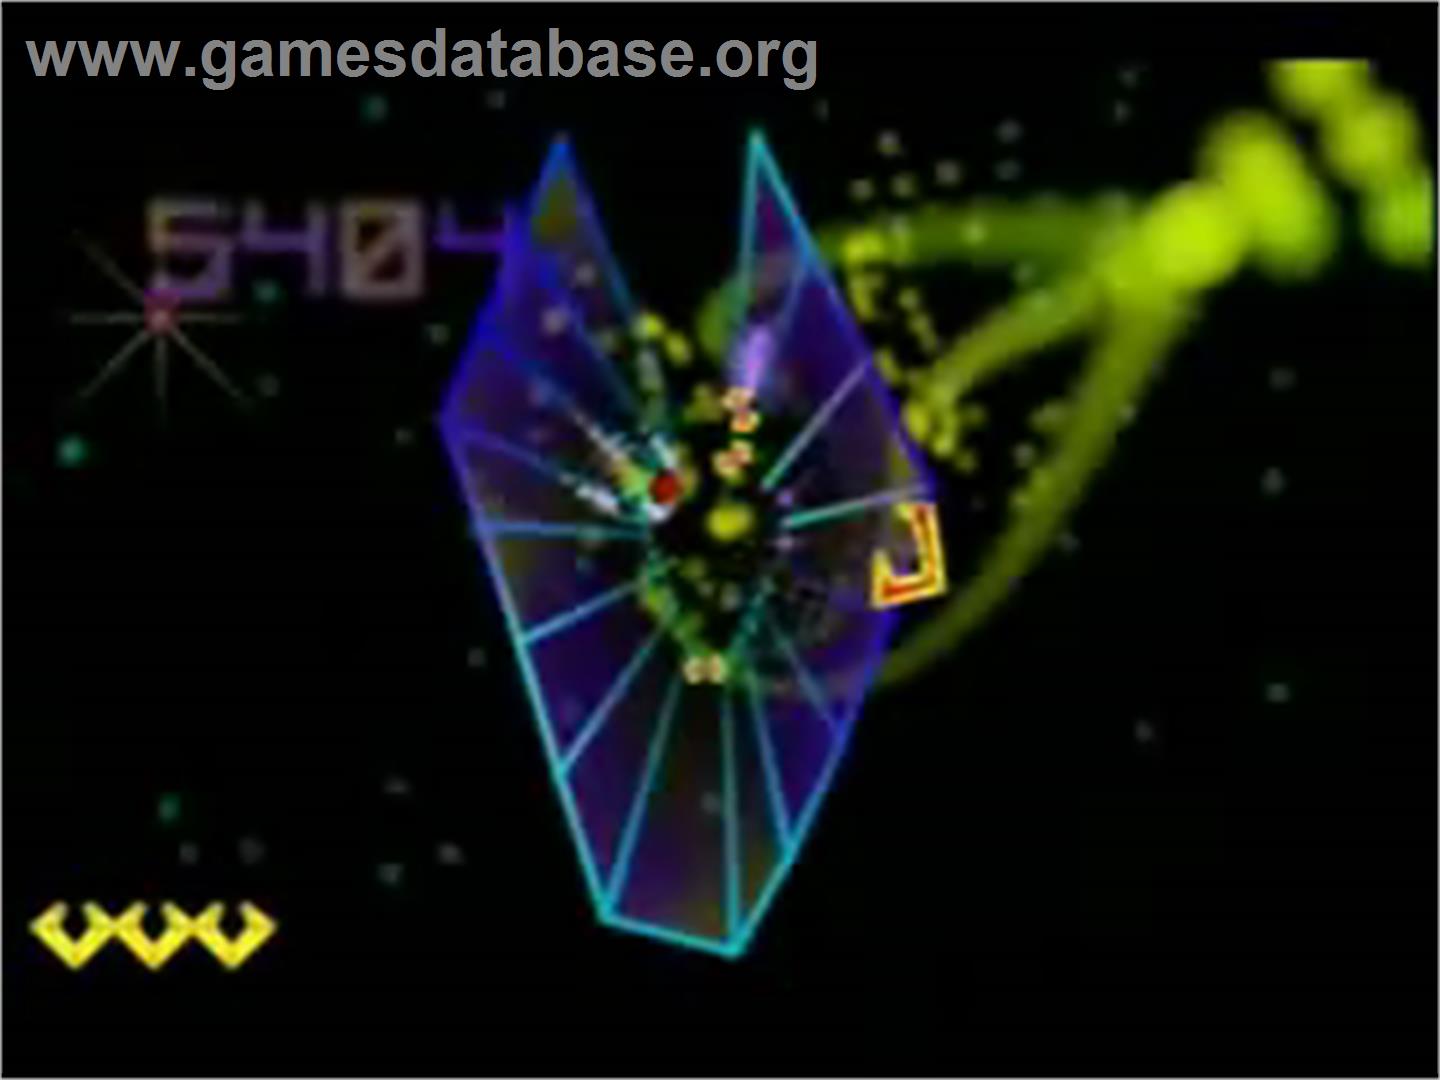 Tempest 3000 - Genesis Microchip Nuon - Artwork - In Game